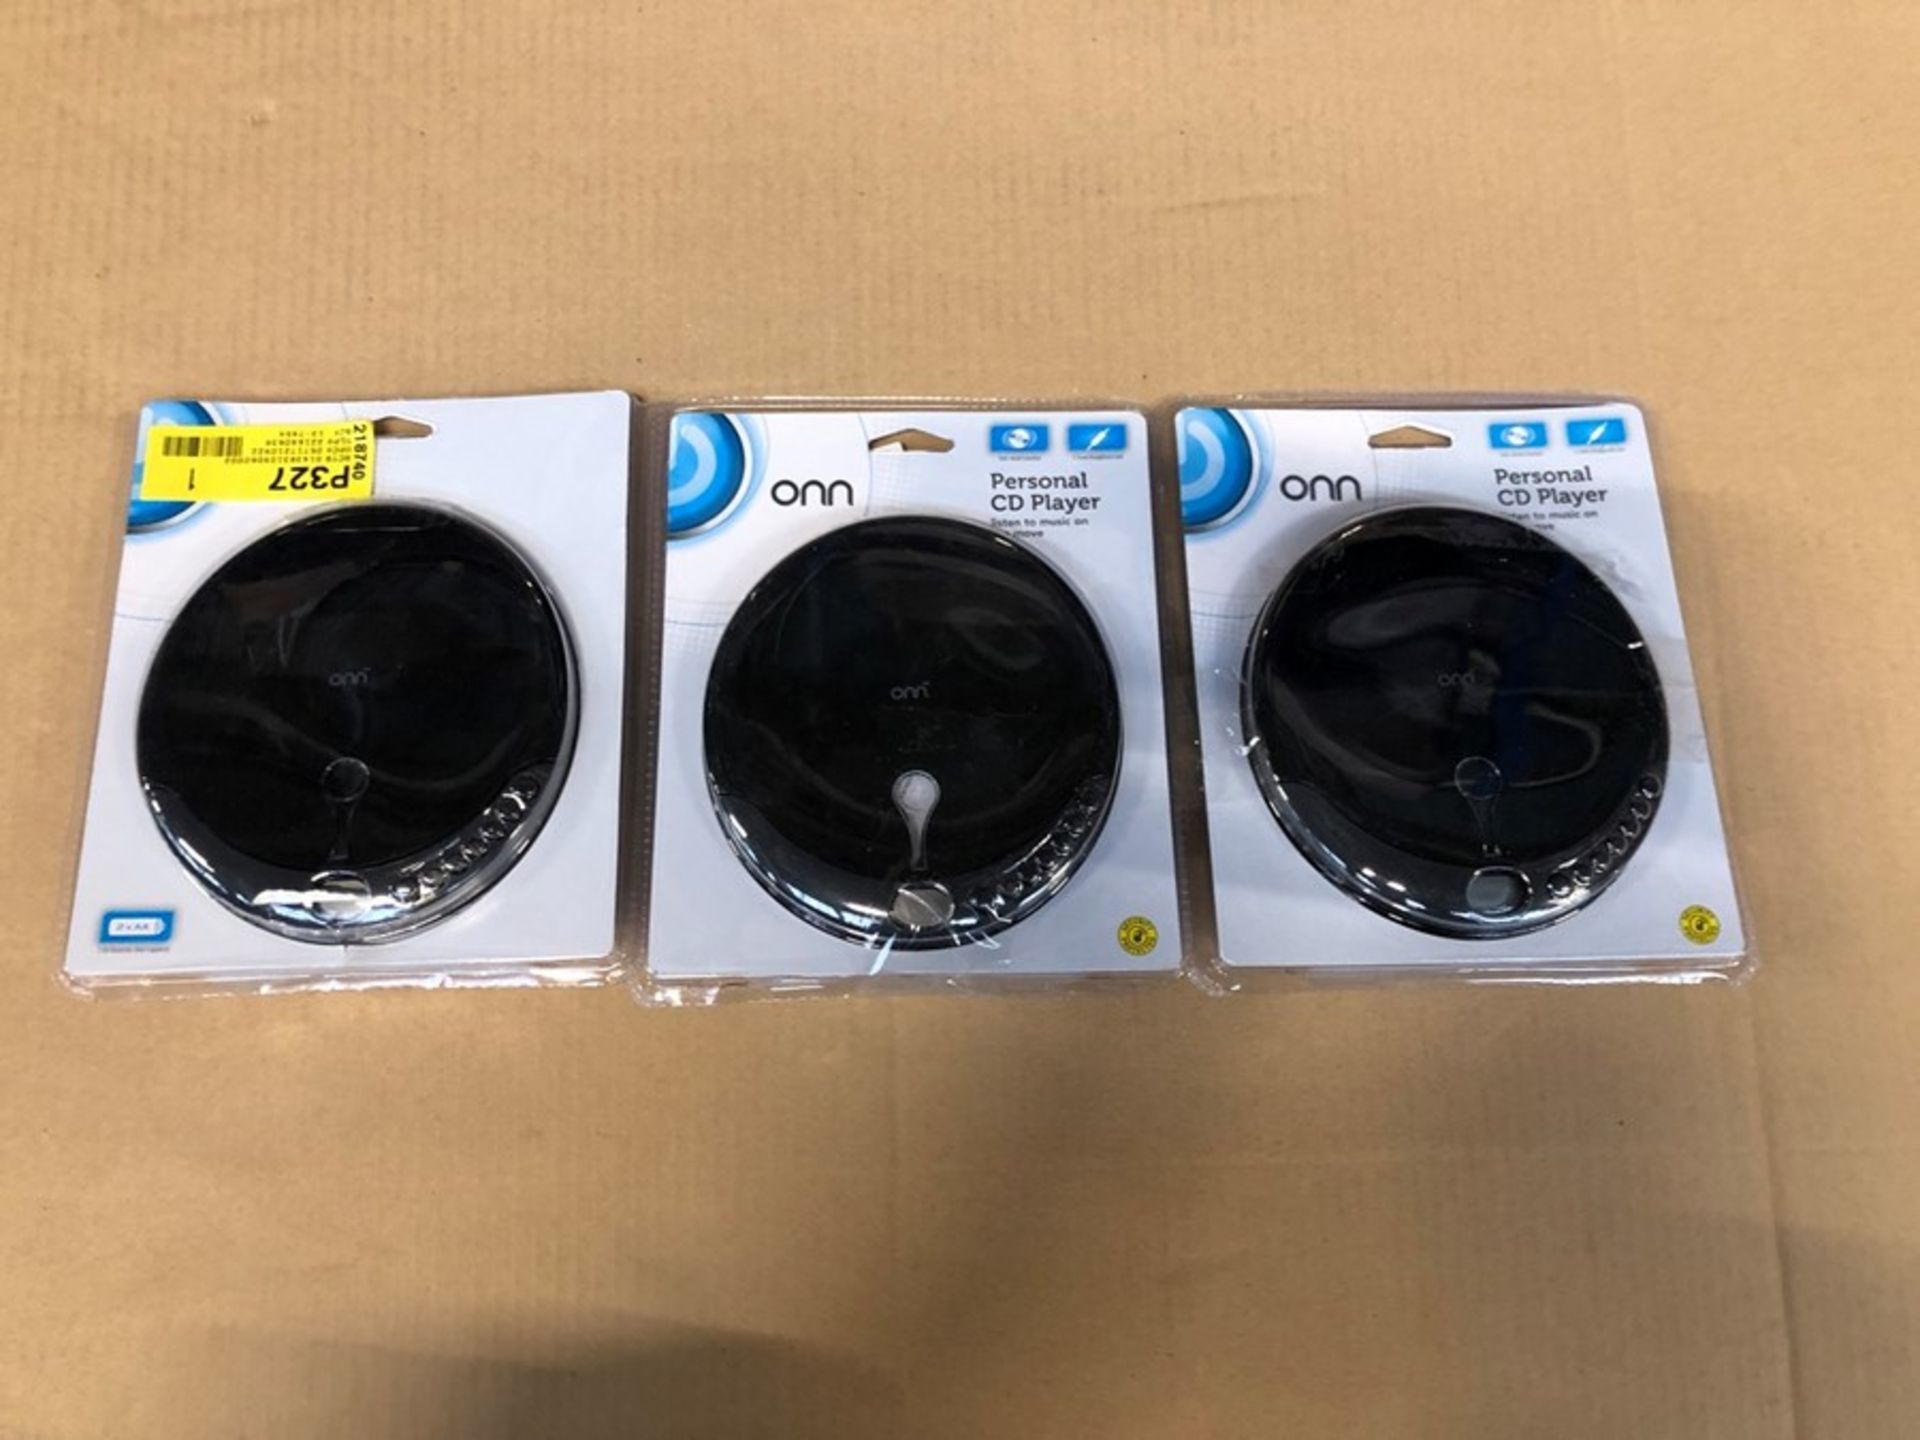 1 LOT TO CONTAIN 3 ONN PERSONAL CD PLAYERS / BL - 8740 / RRP £30.00 (PUBLIC VIEWING AVAILABLE)